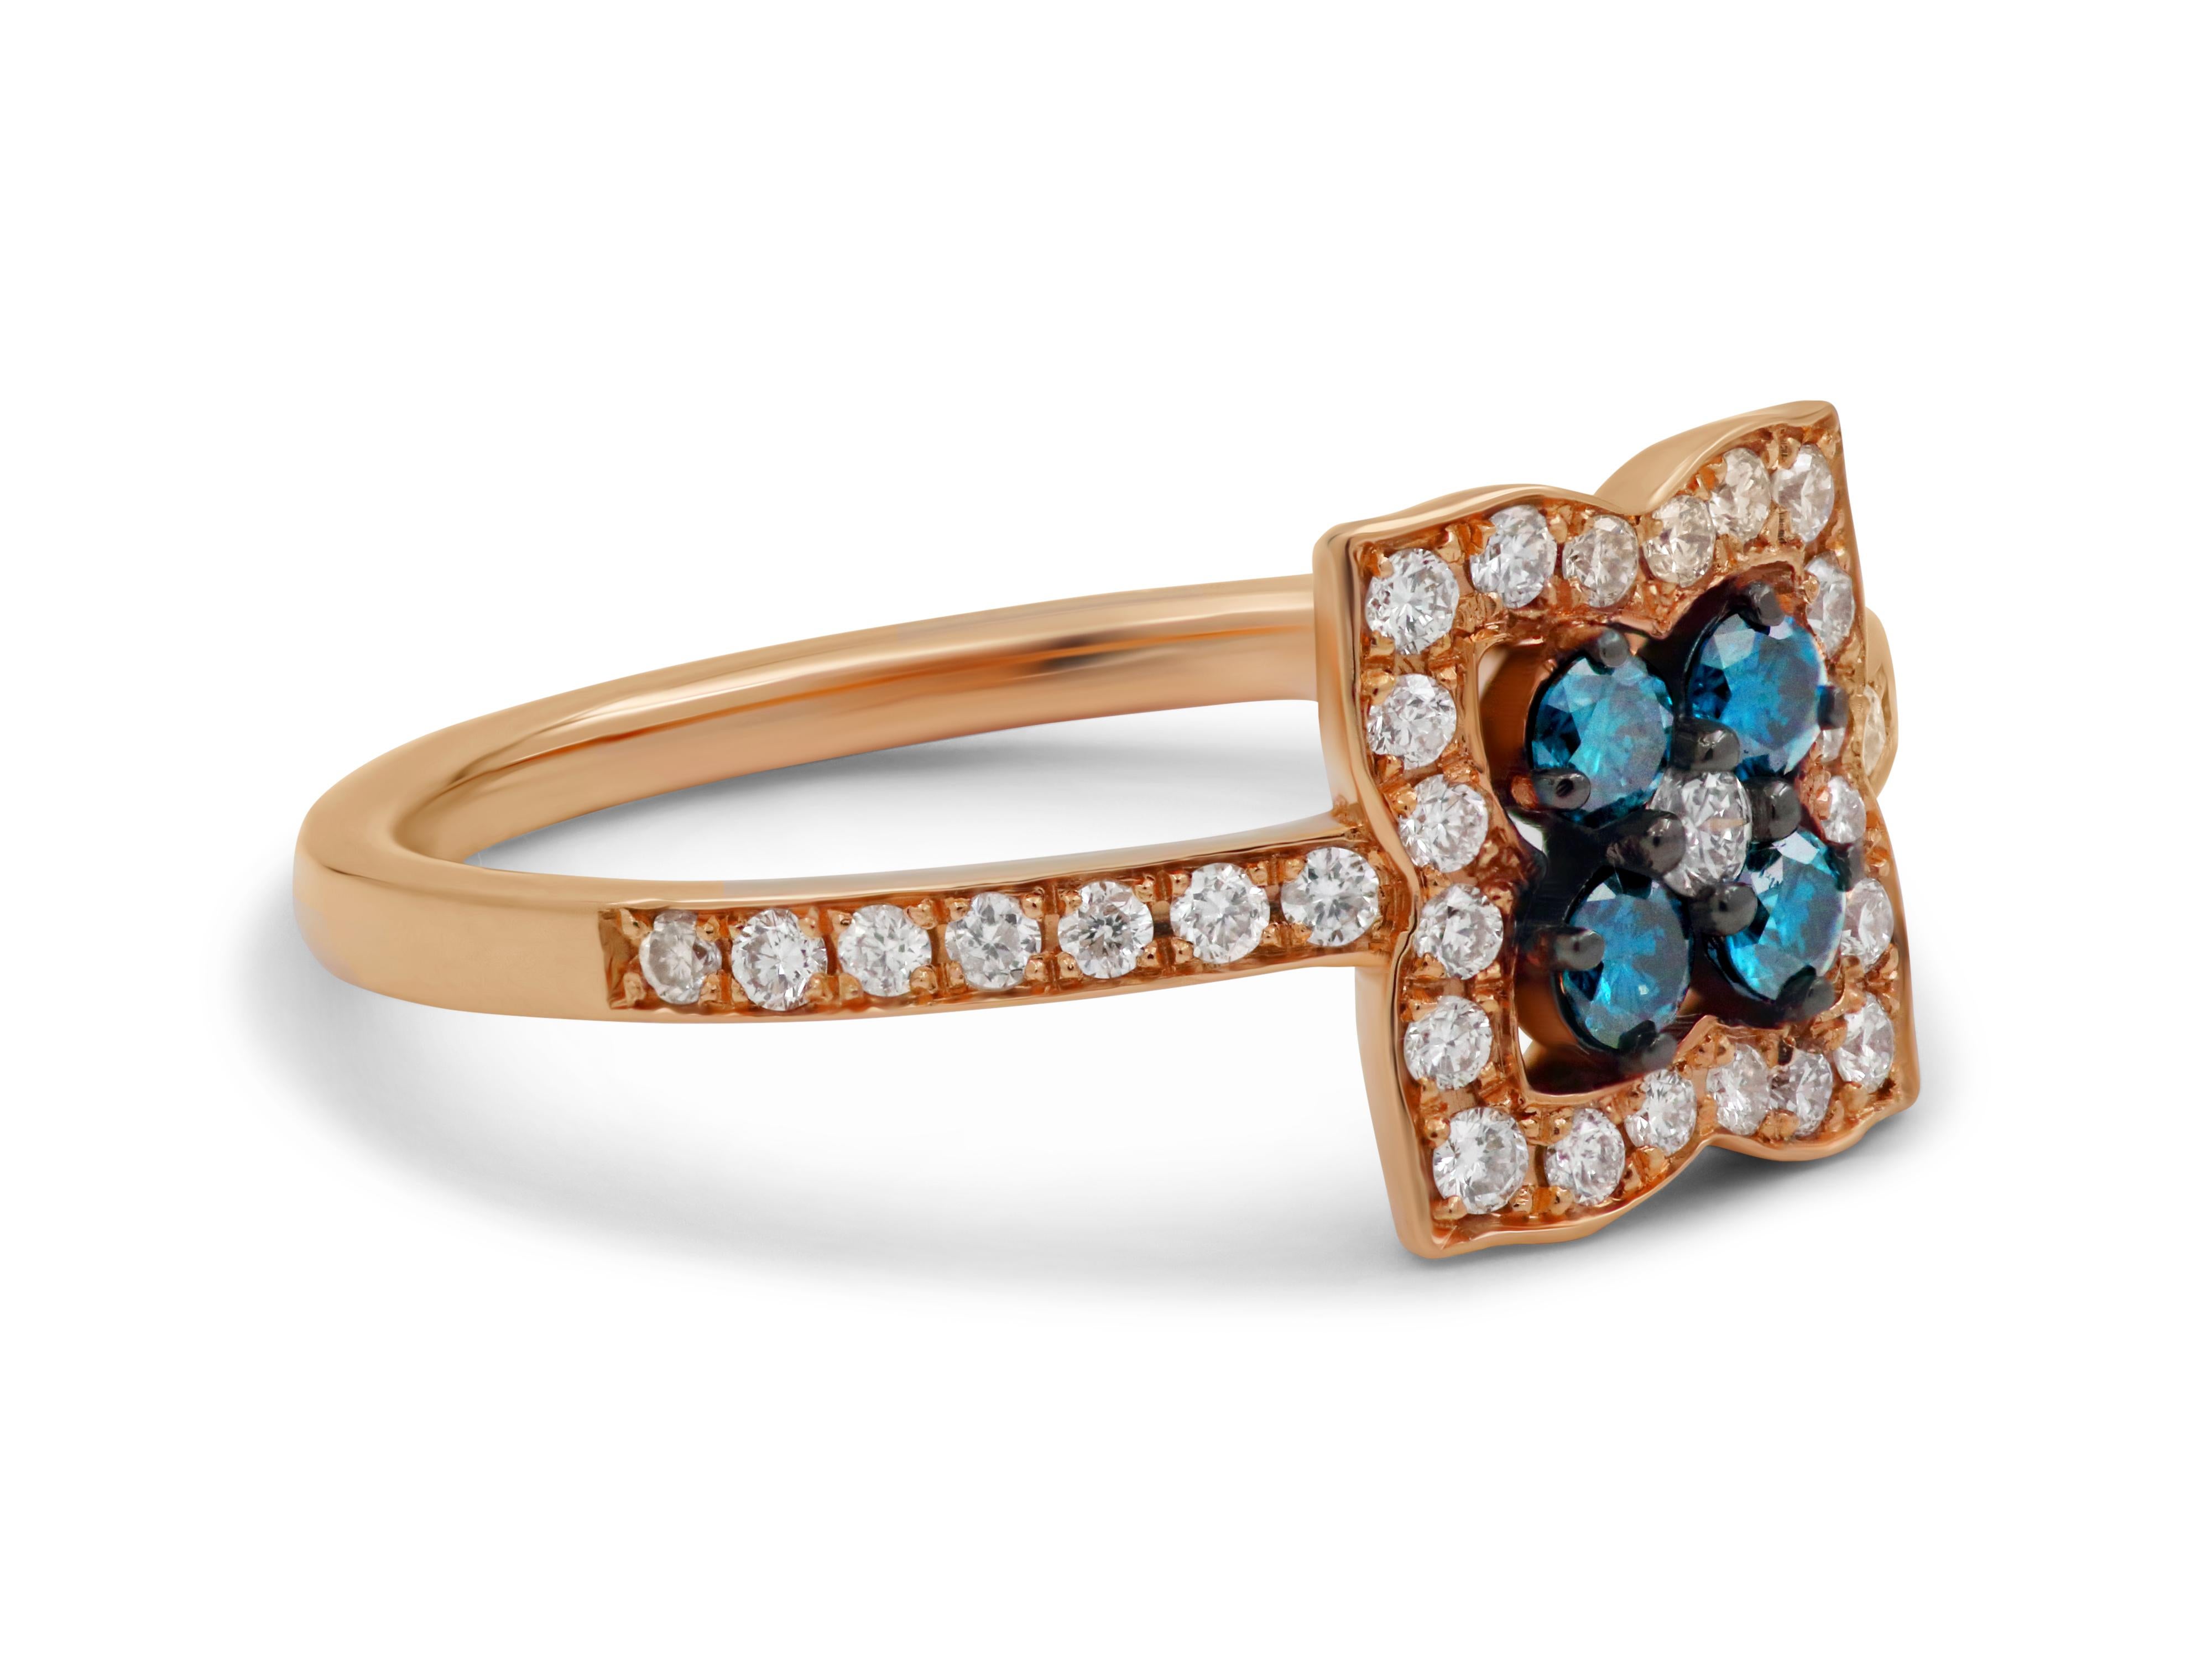 18k rose gold dainty ring with 0.16 carats blue diamonds and 0.28 carats brilliant cut diamonds.